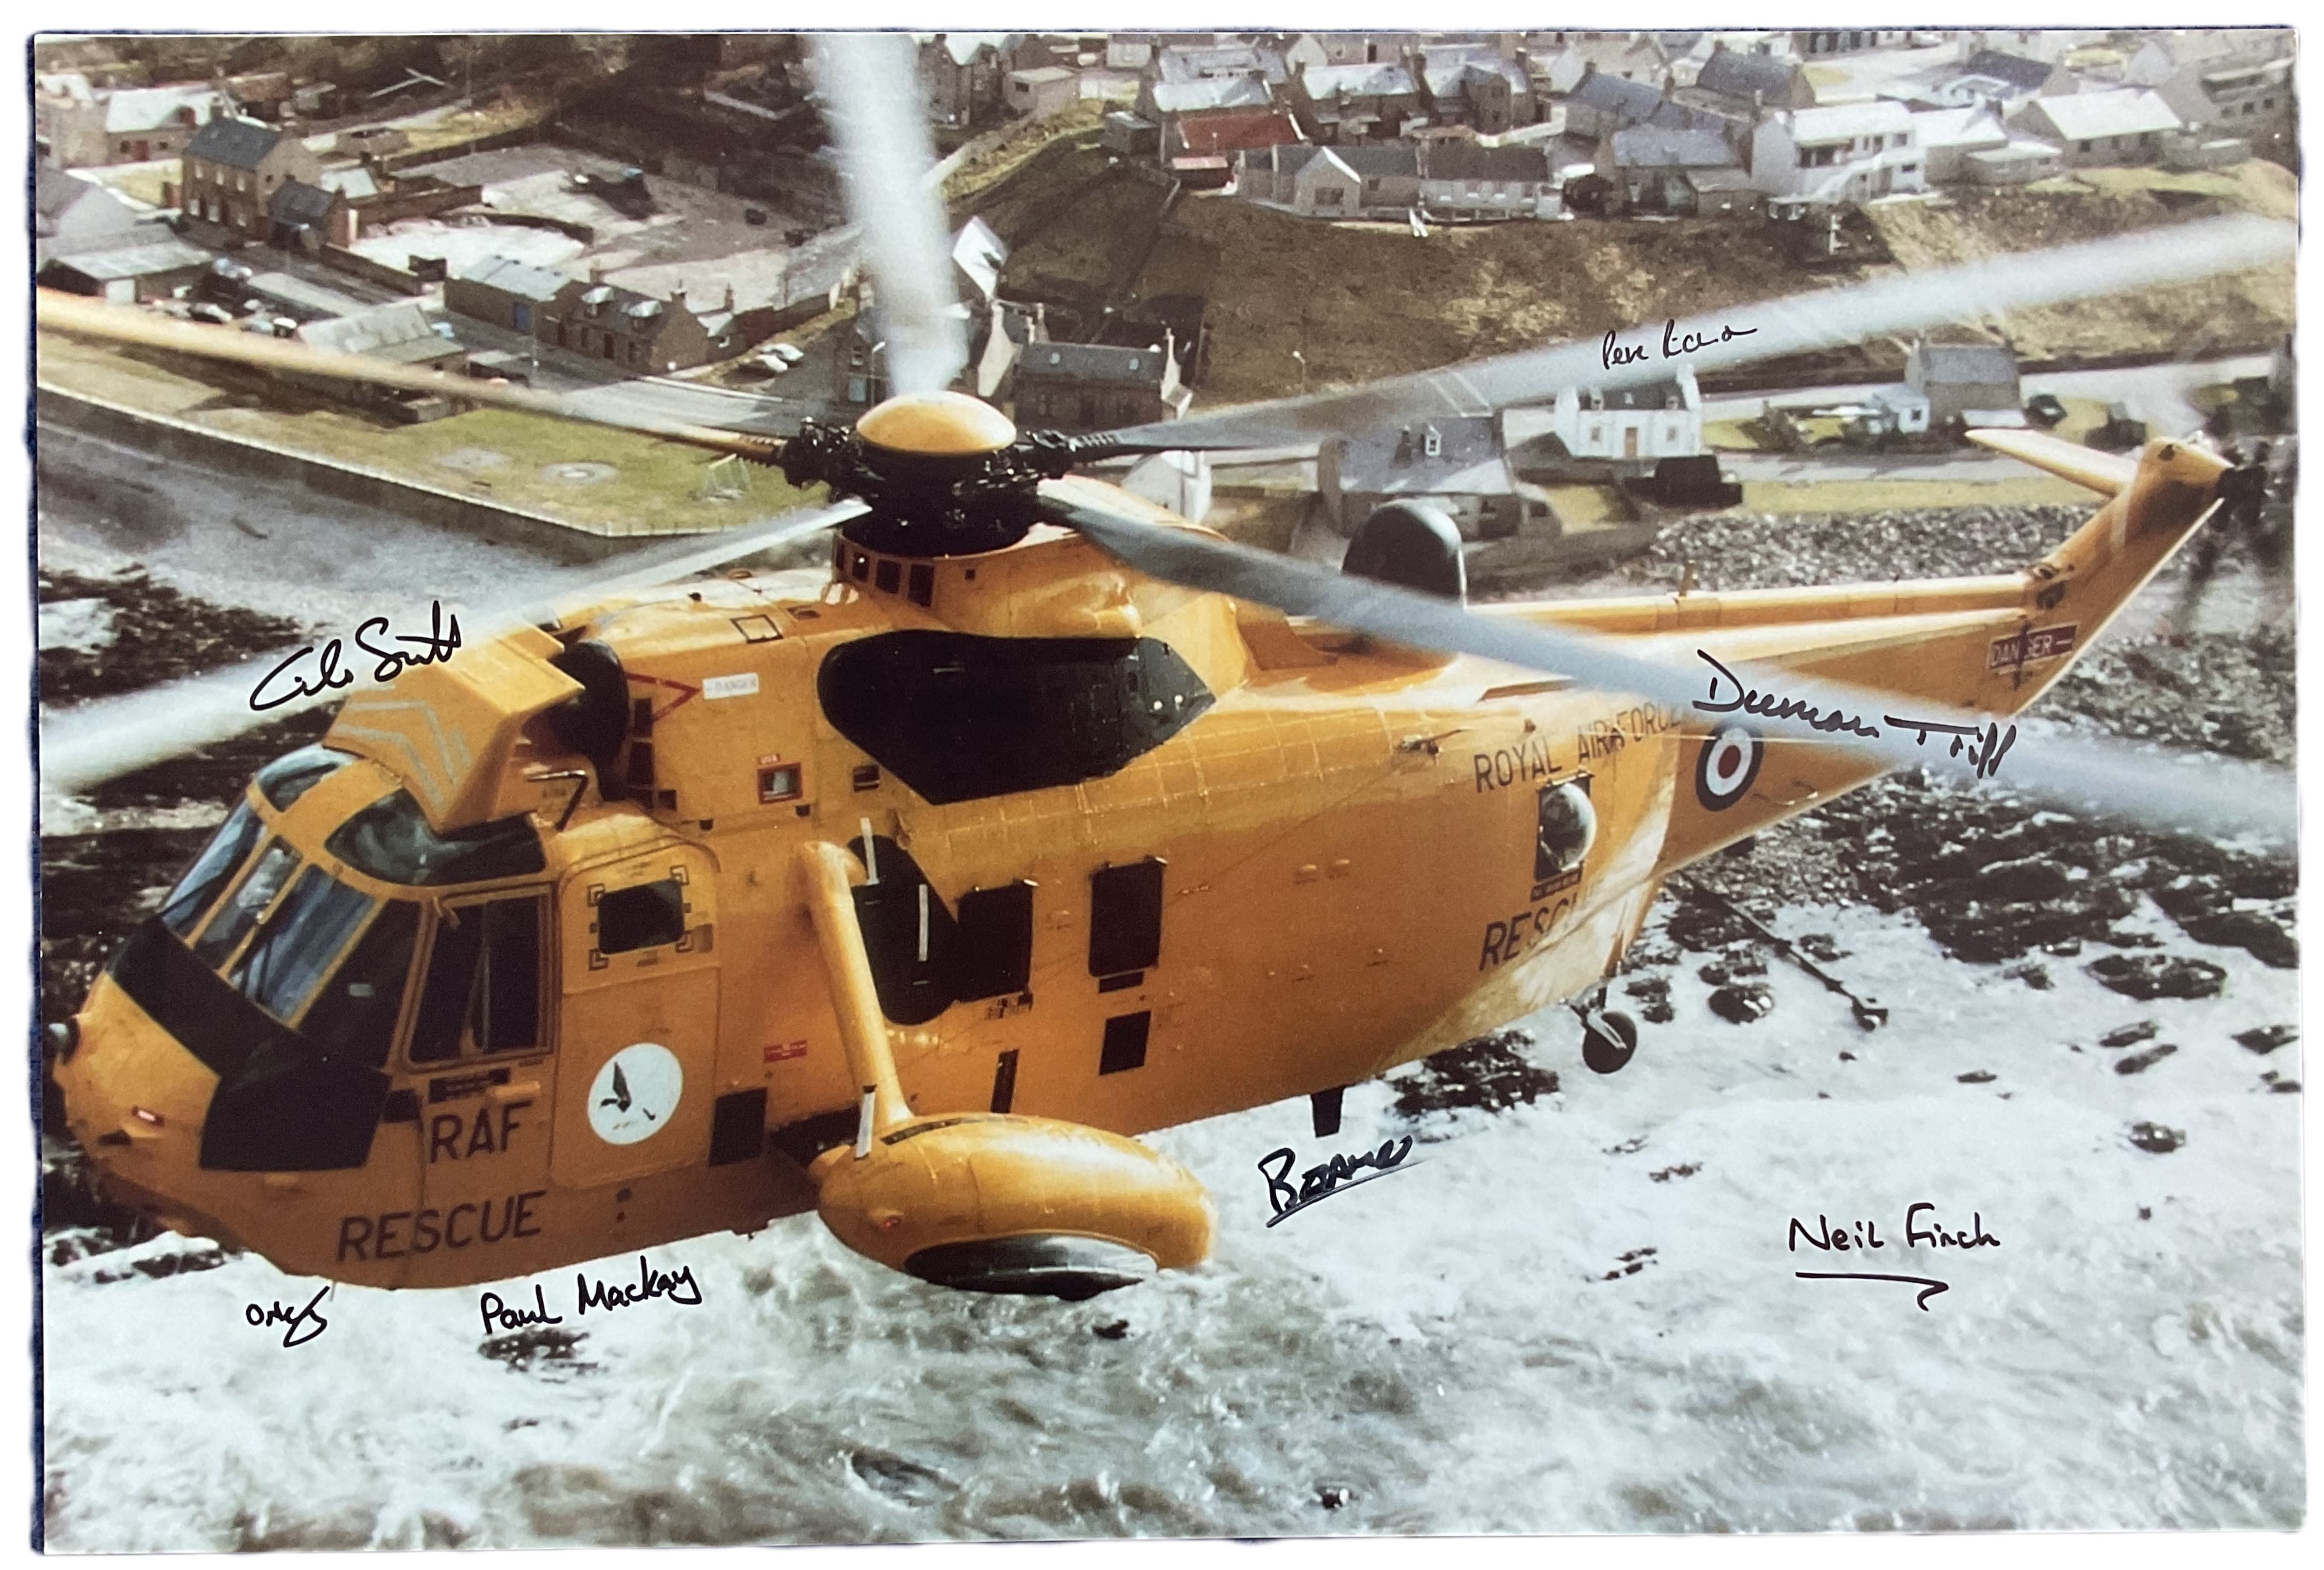 Seven RAF Lossiemouth Helicopter search and rescue crew signed stunning 16 x 12 inch colour close up